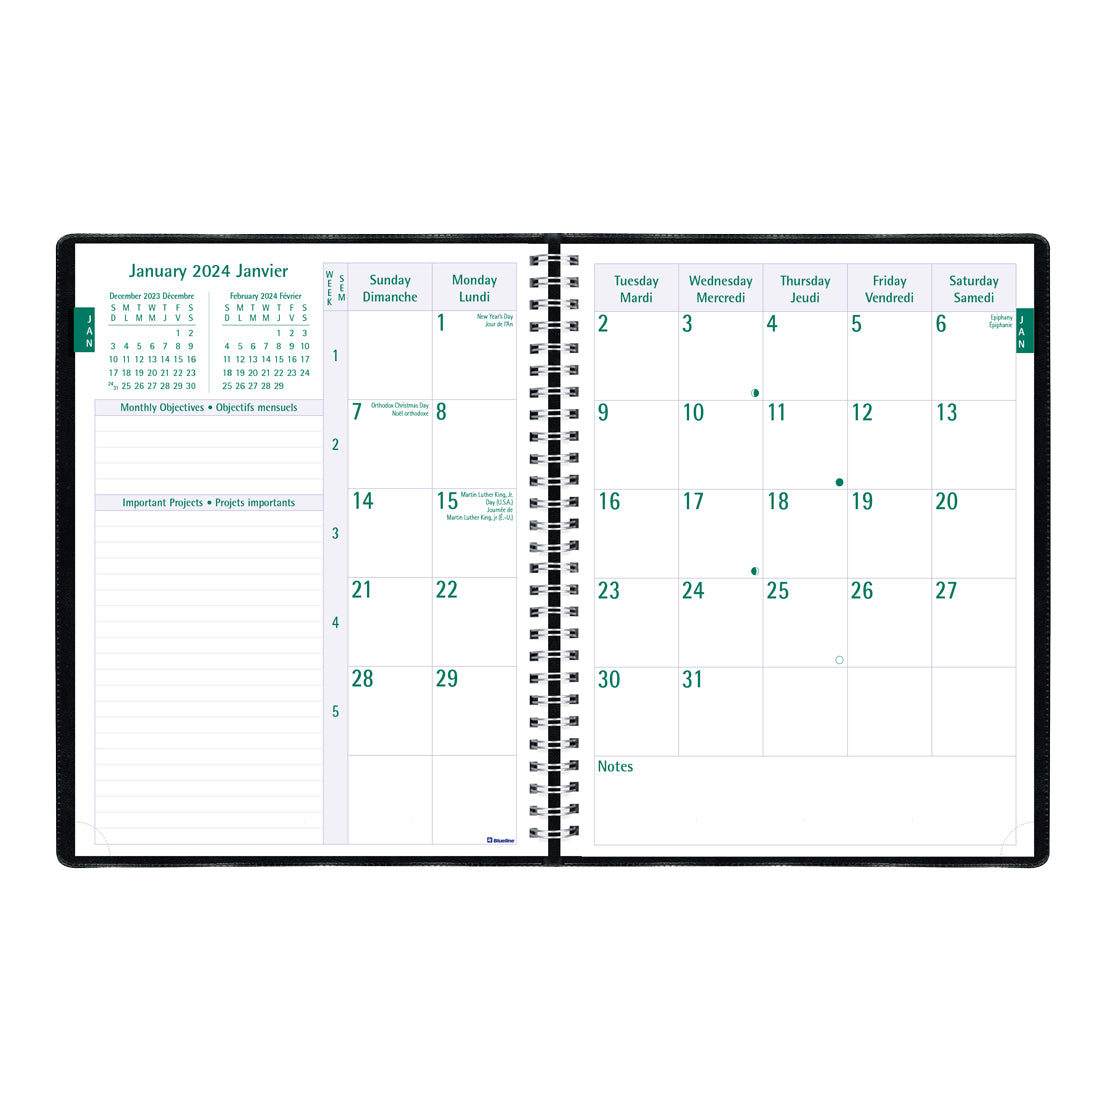 Timanager® Weekly Planner 2024, Bilingual, Black